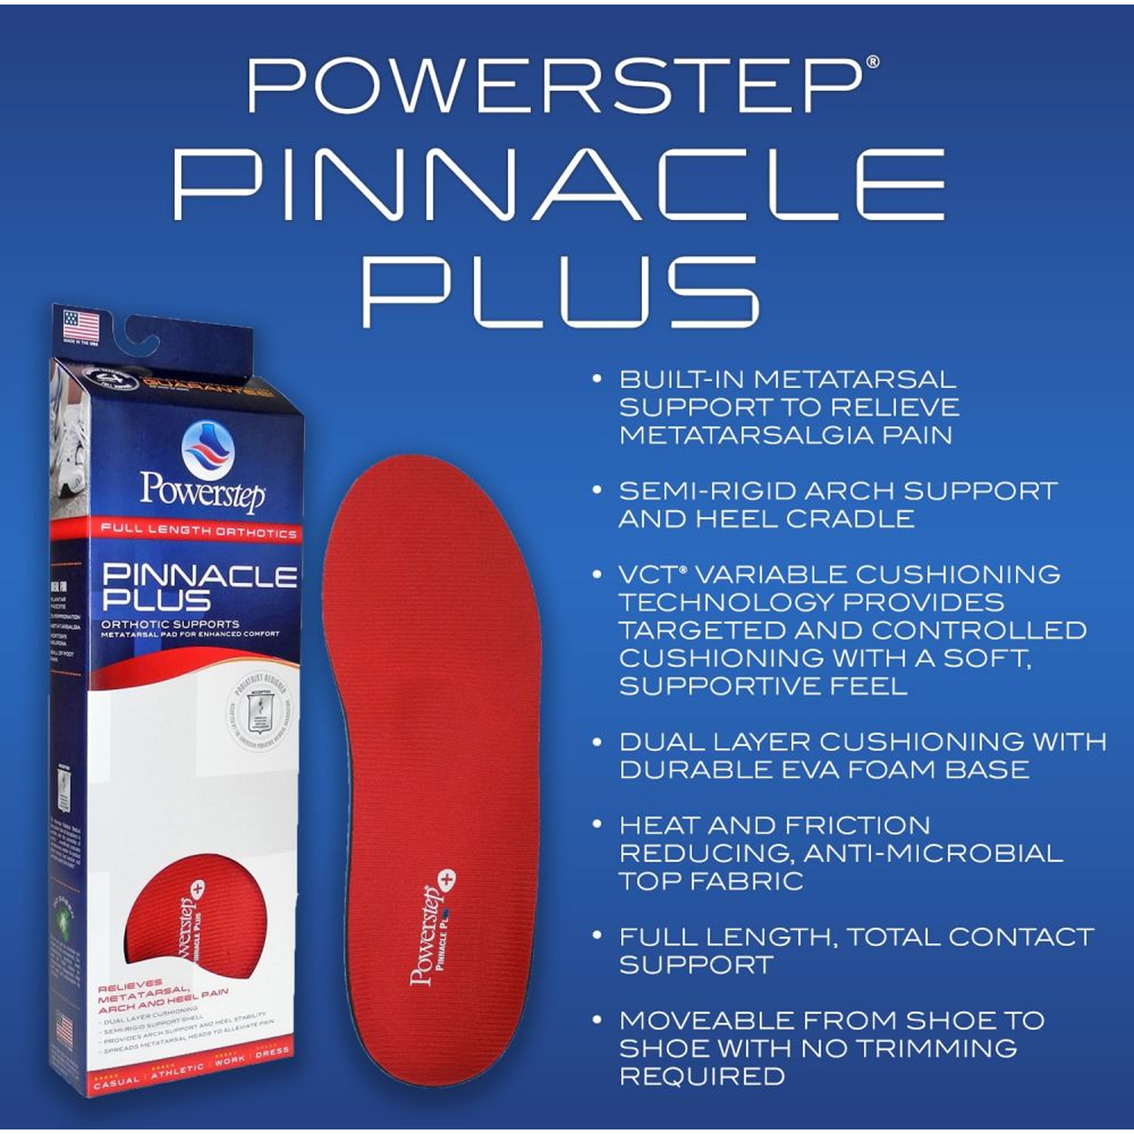 Powerstep Pinnacle Plus Full Length Orthotic Insoles with Metatarsal Support - Image 7 of 10